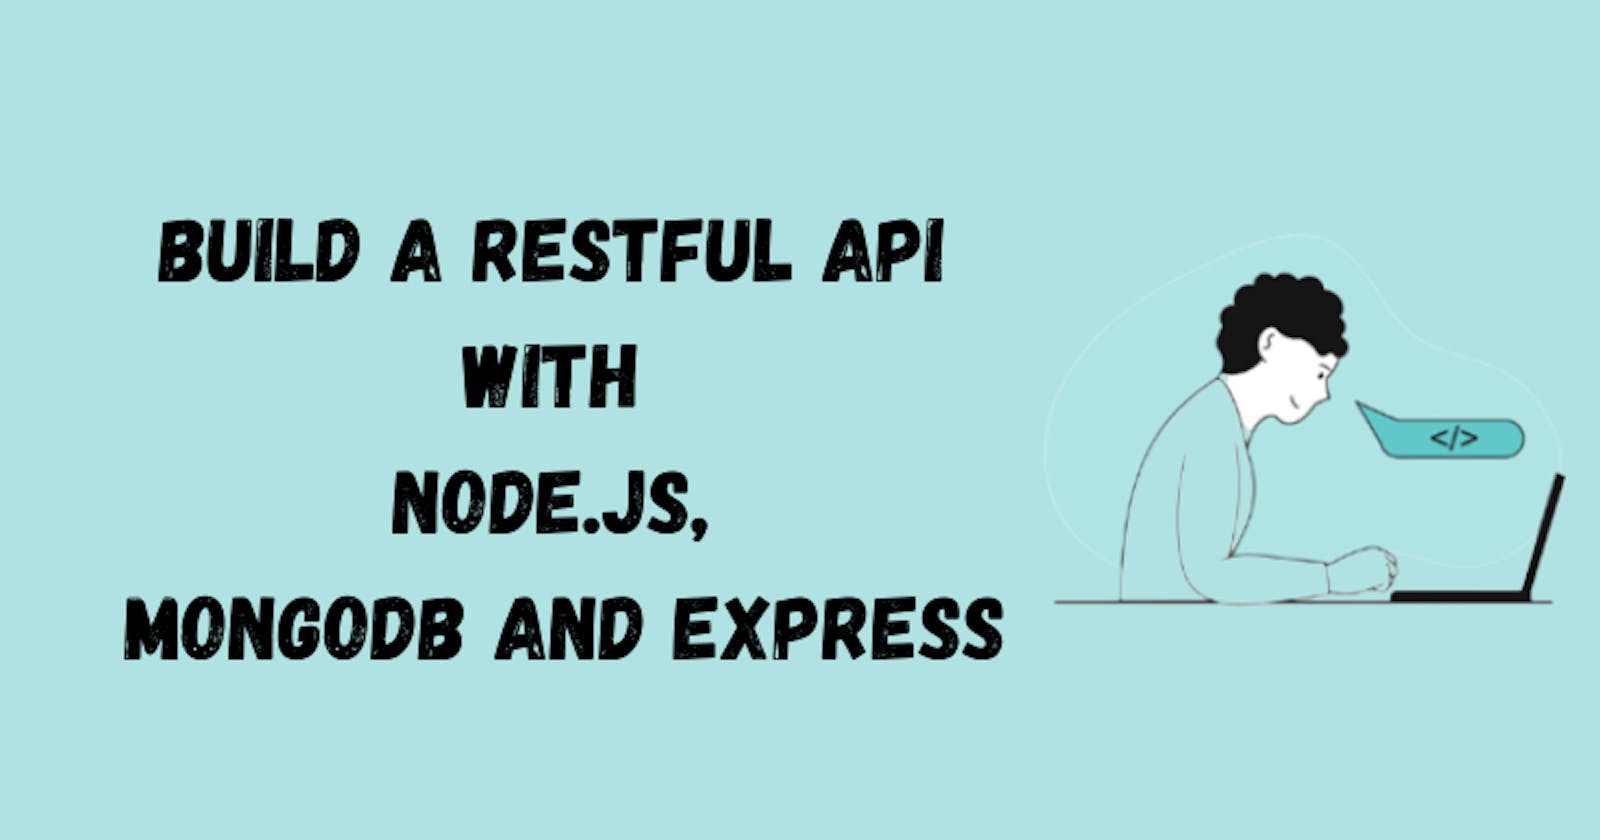 9 Steps to Build a RESTful API with Node.js, MongoDB, and Express